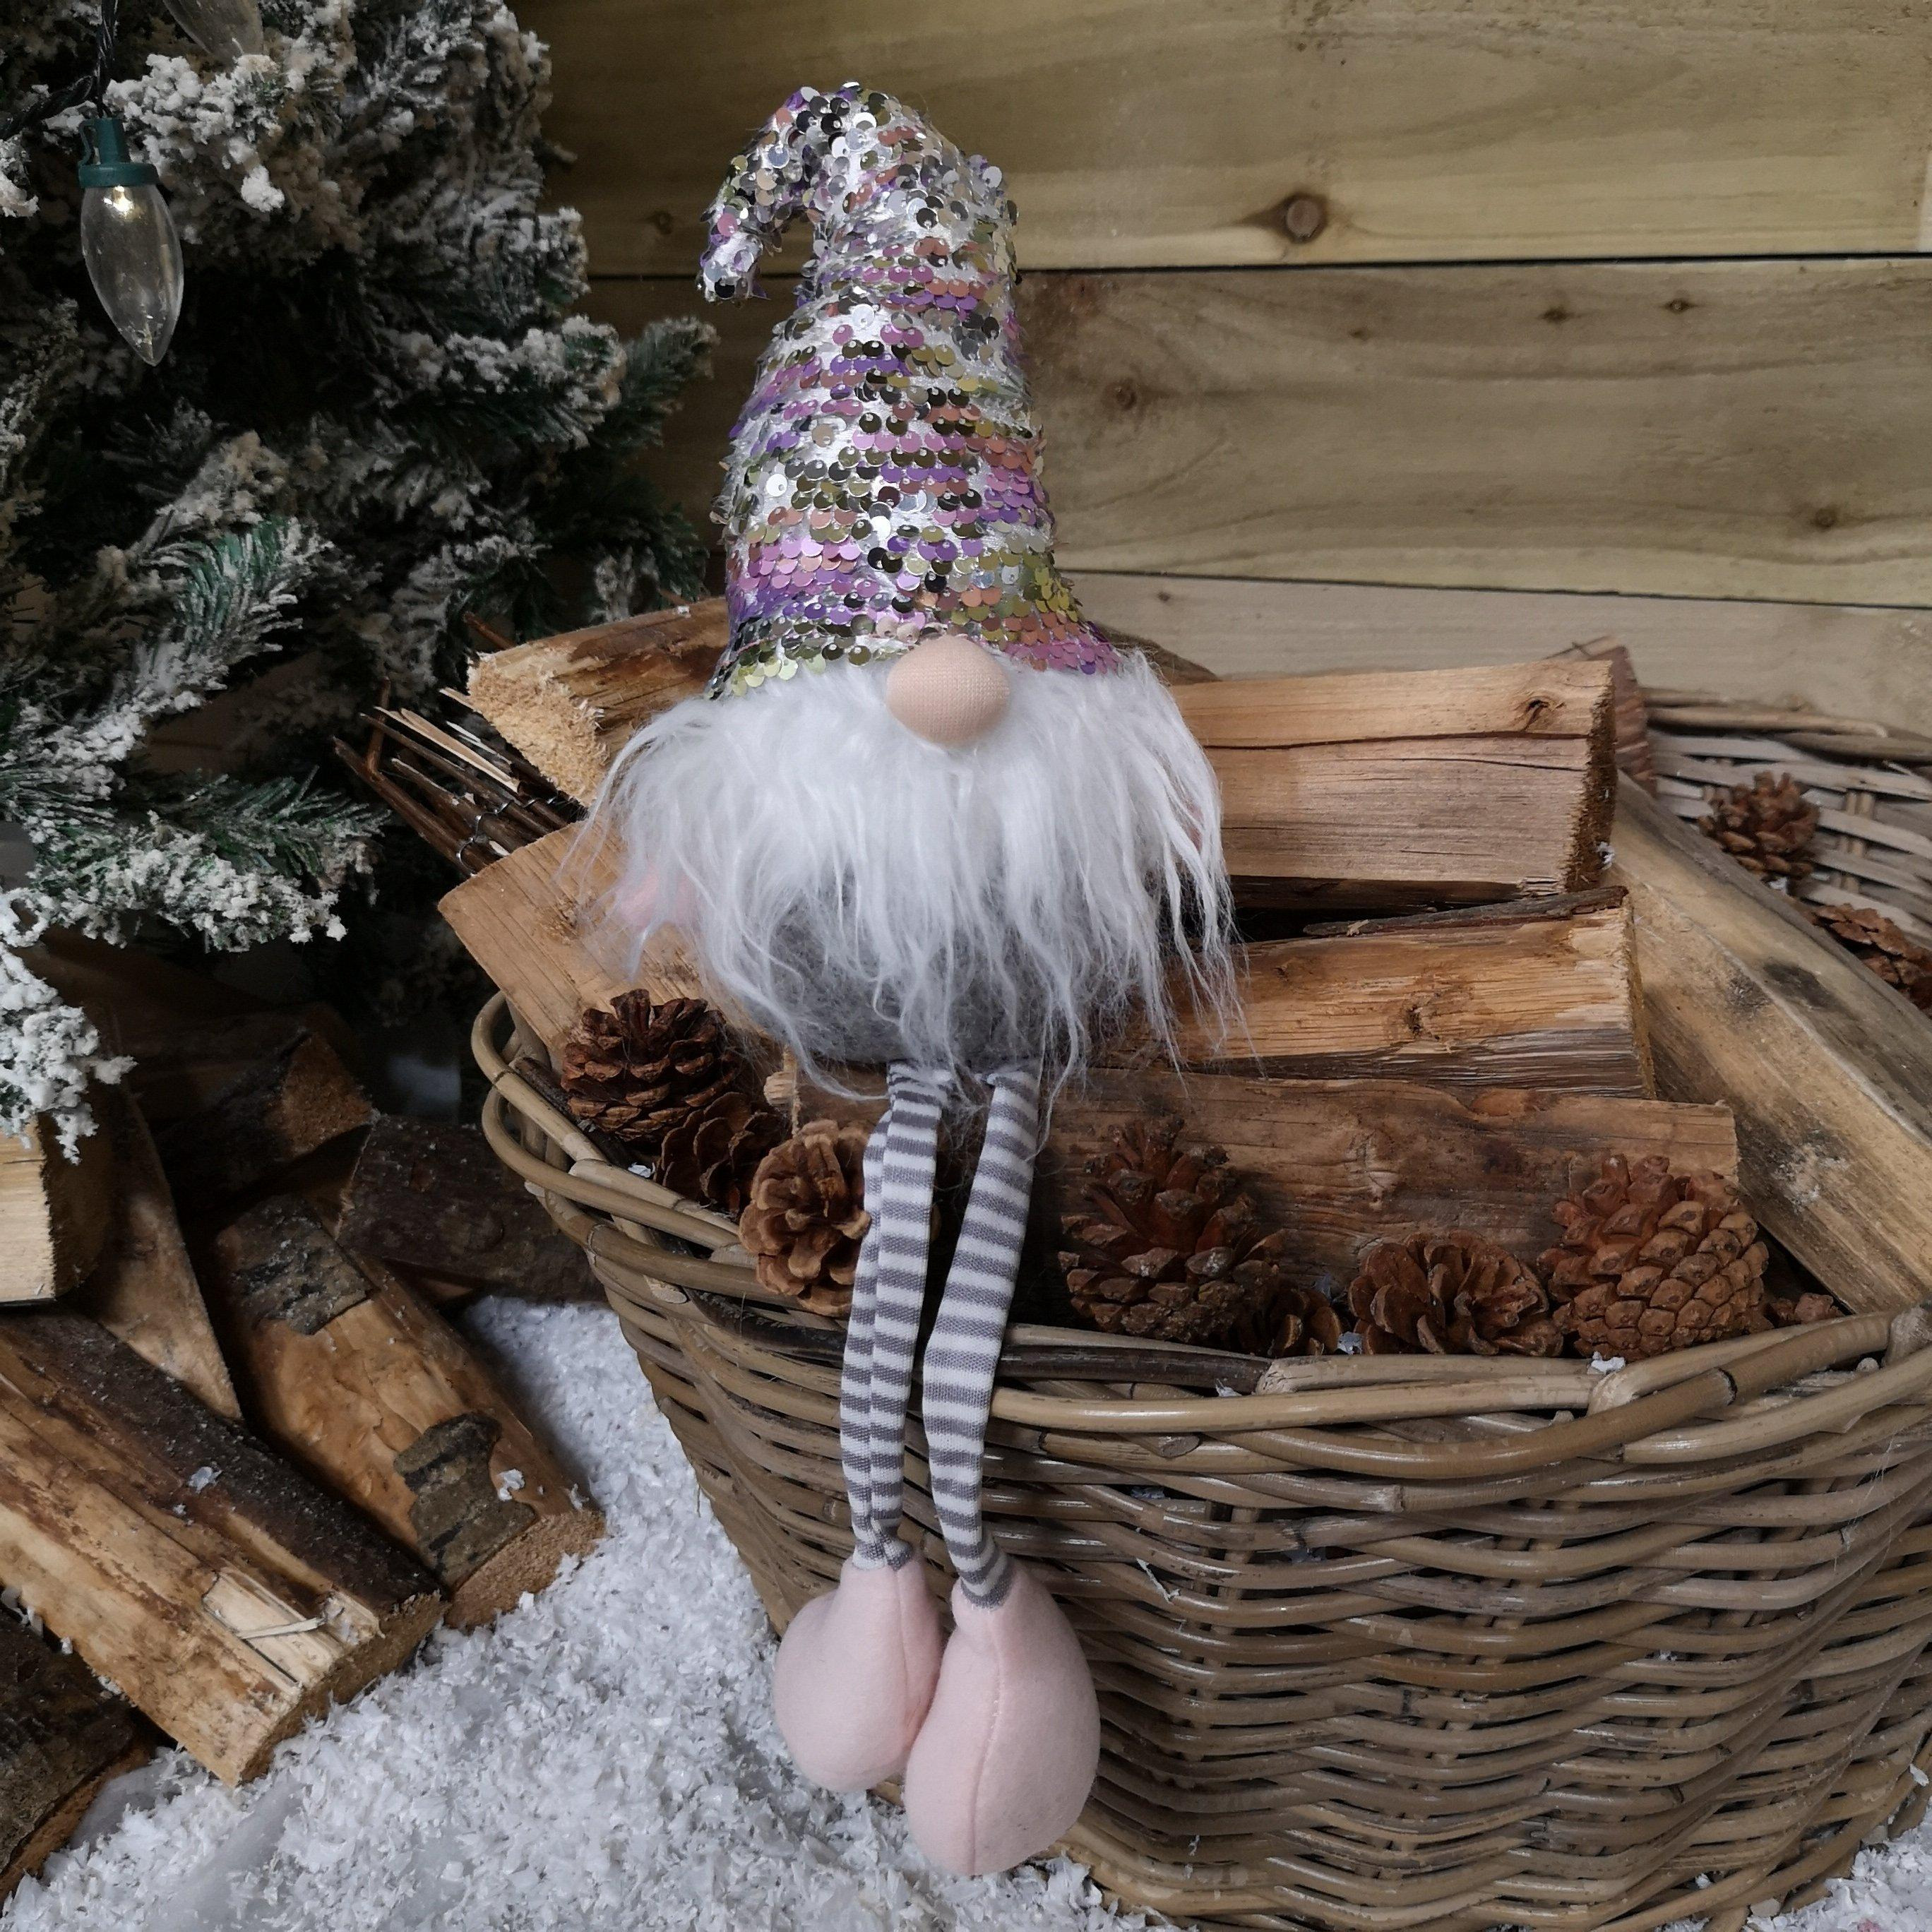 49cm Festive Christmas Sitting Gonk with Dangly Legs & Sequin Hat in Pink & Grey - image 1